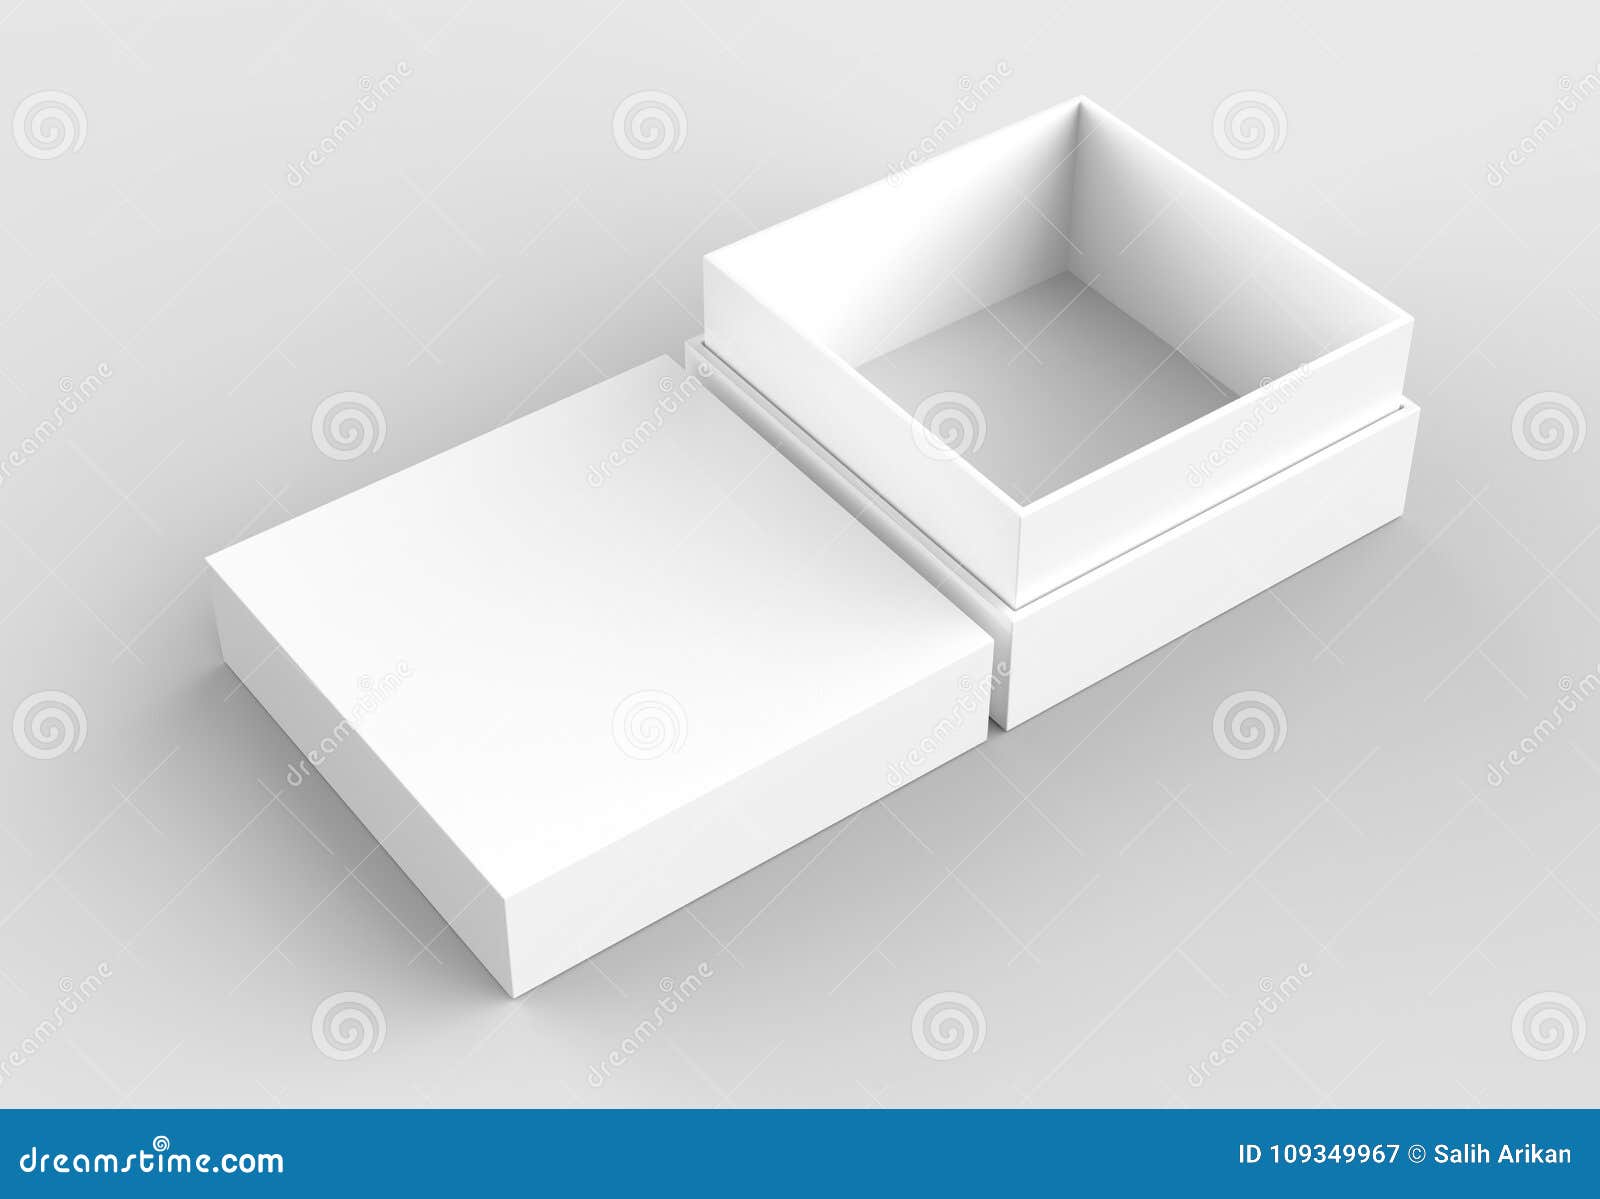 Download Elegant Box Mock Up Isolated On Soft Gray Background. 3D ...